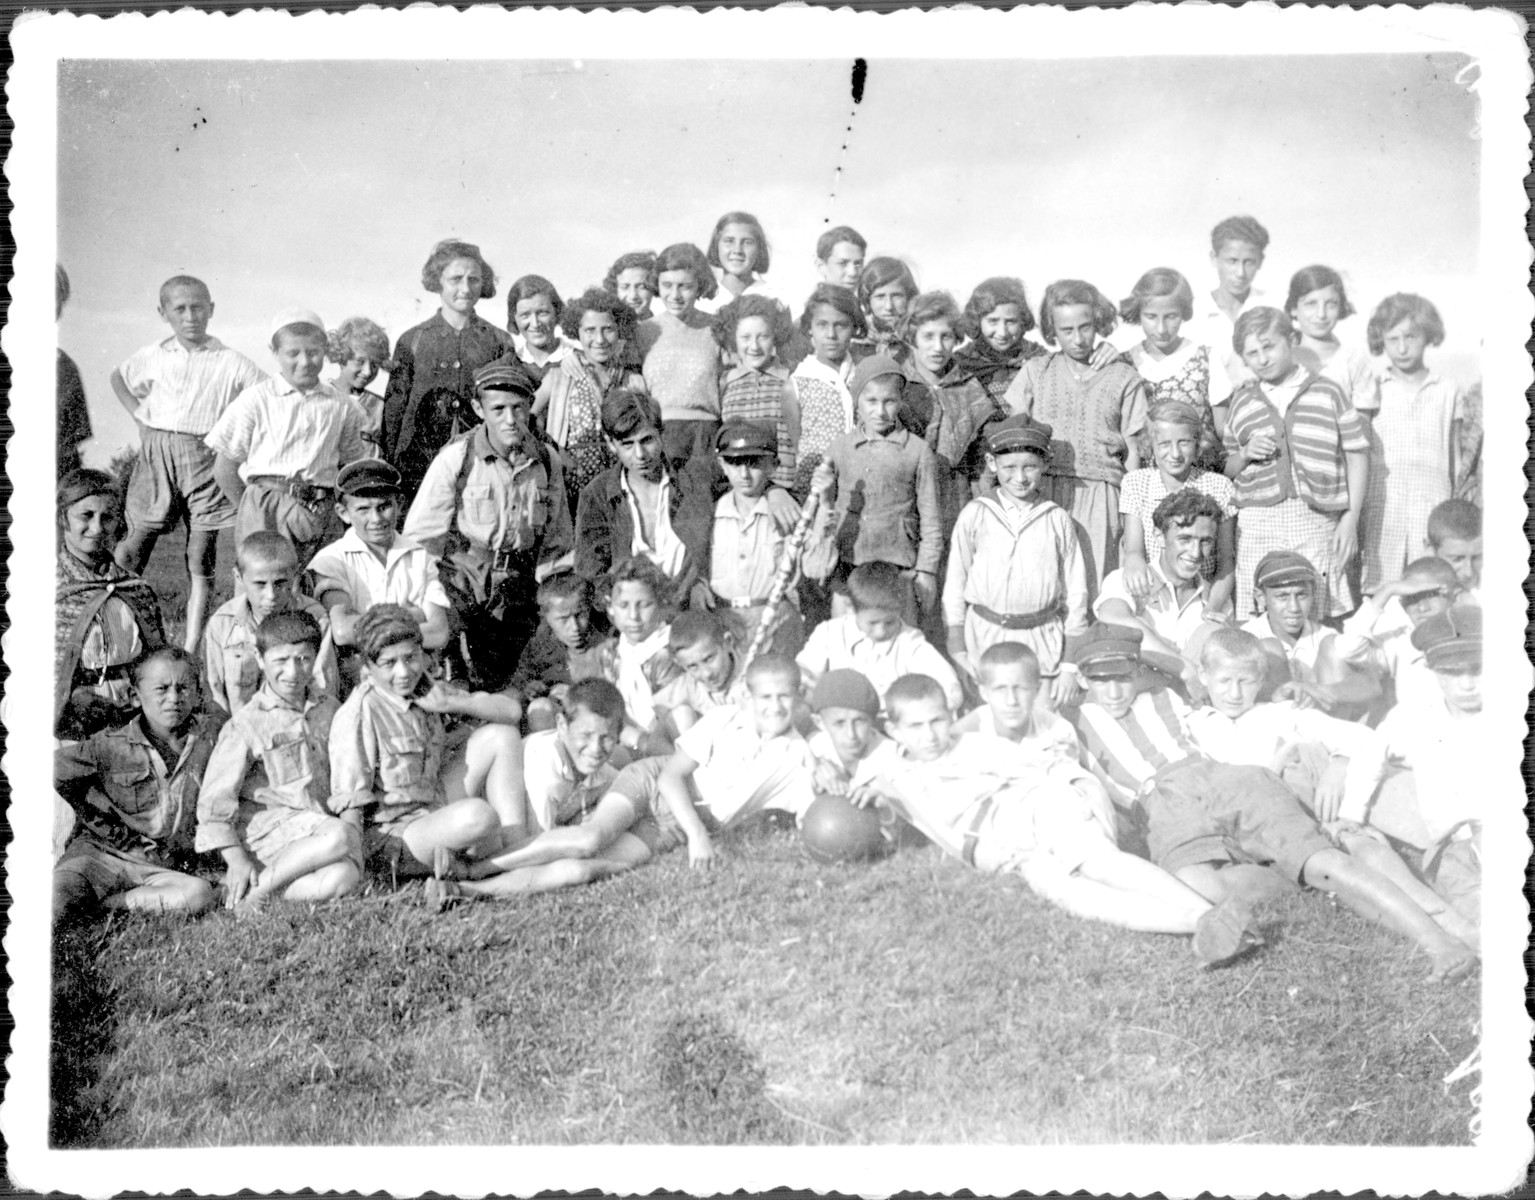 Members of Hashomer Hatzair from the Korczak Orphanage go a Lag B'omer outing.

Shlomo Nadel is pictured on the far right with a hat.